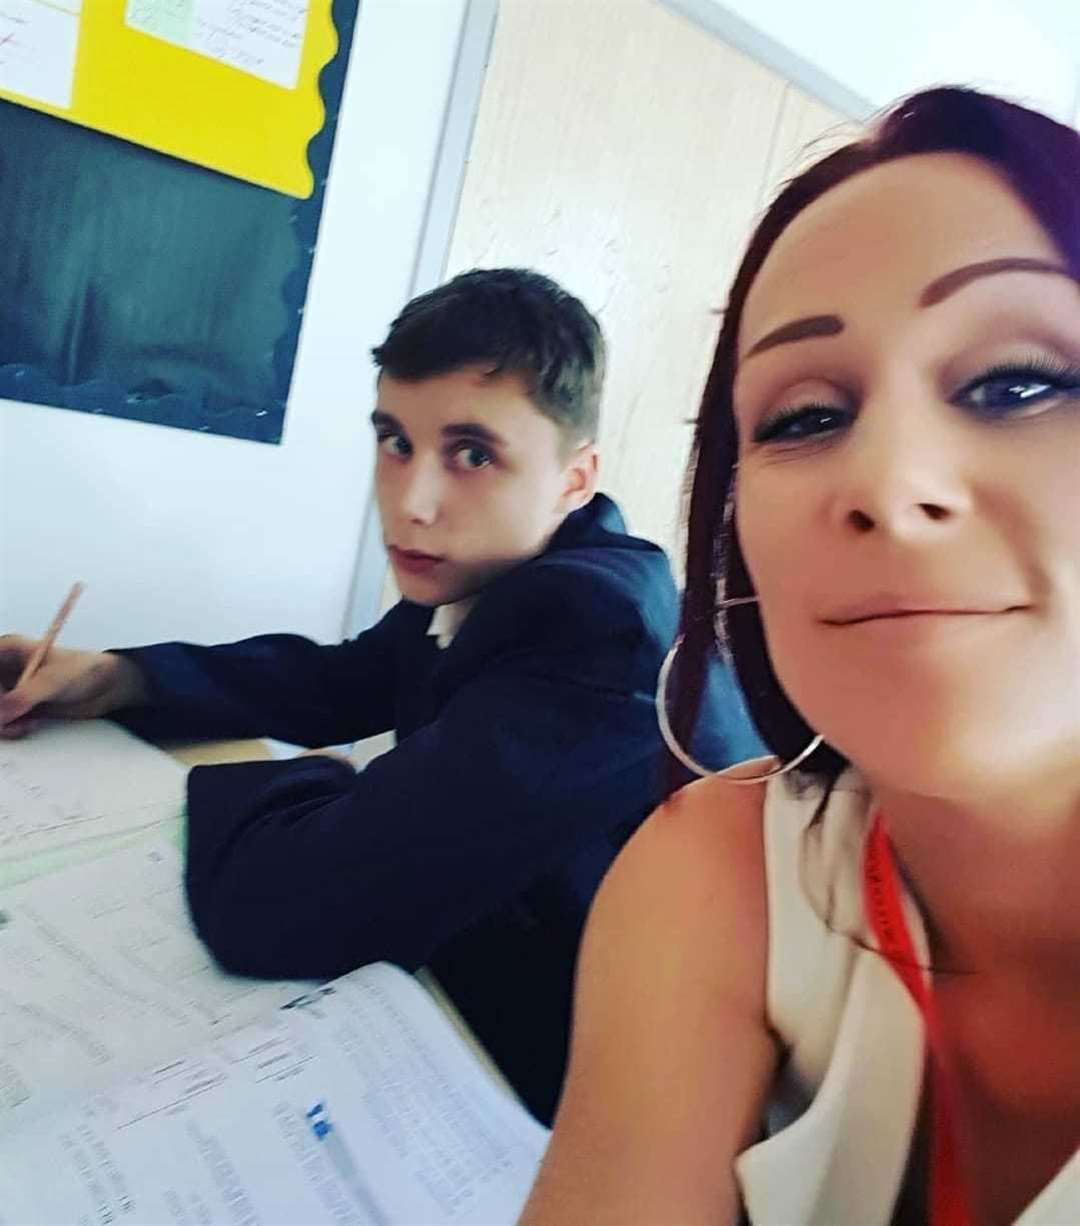 Mum Becky Crandley sitting next to her son Harley in his maths lesson at The Sittingbourne School on Friday